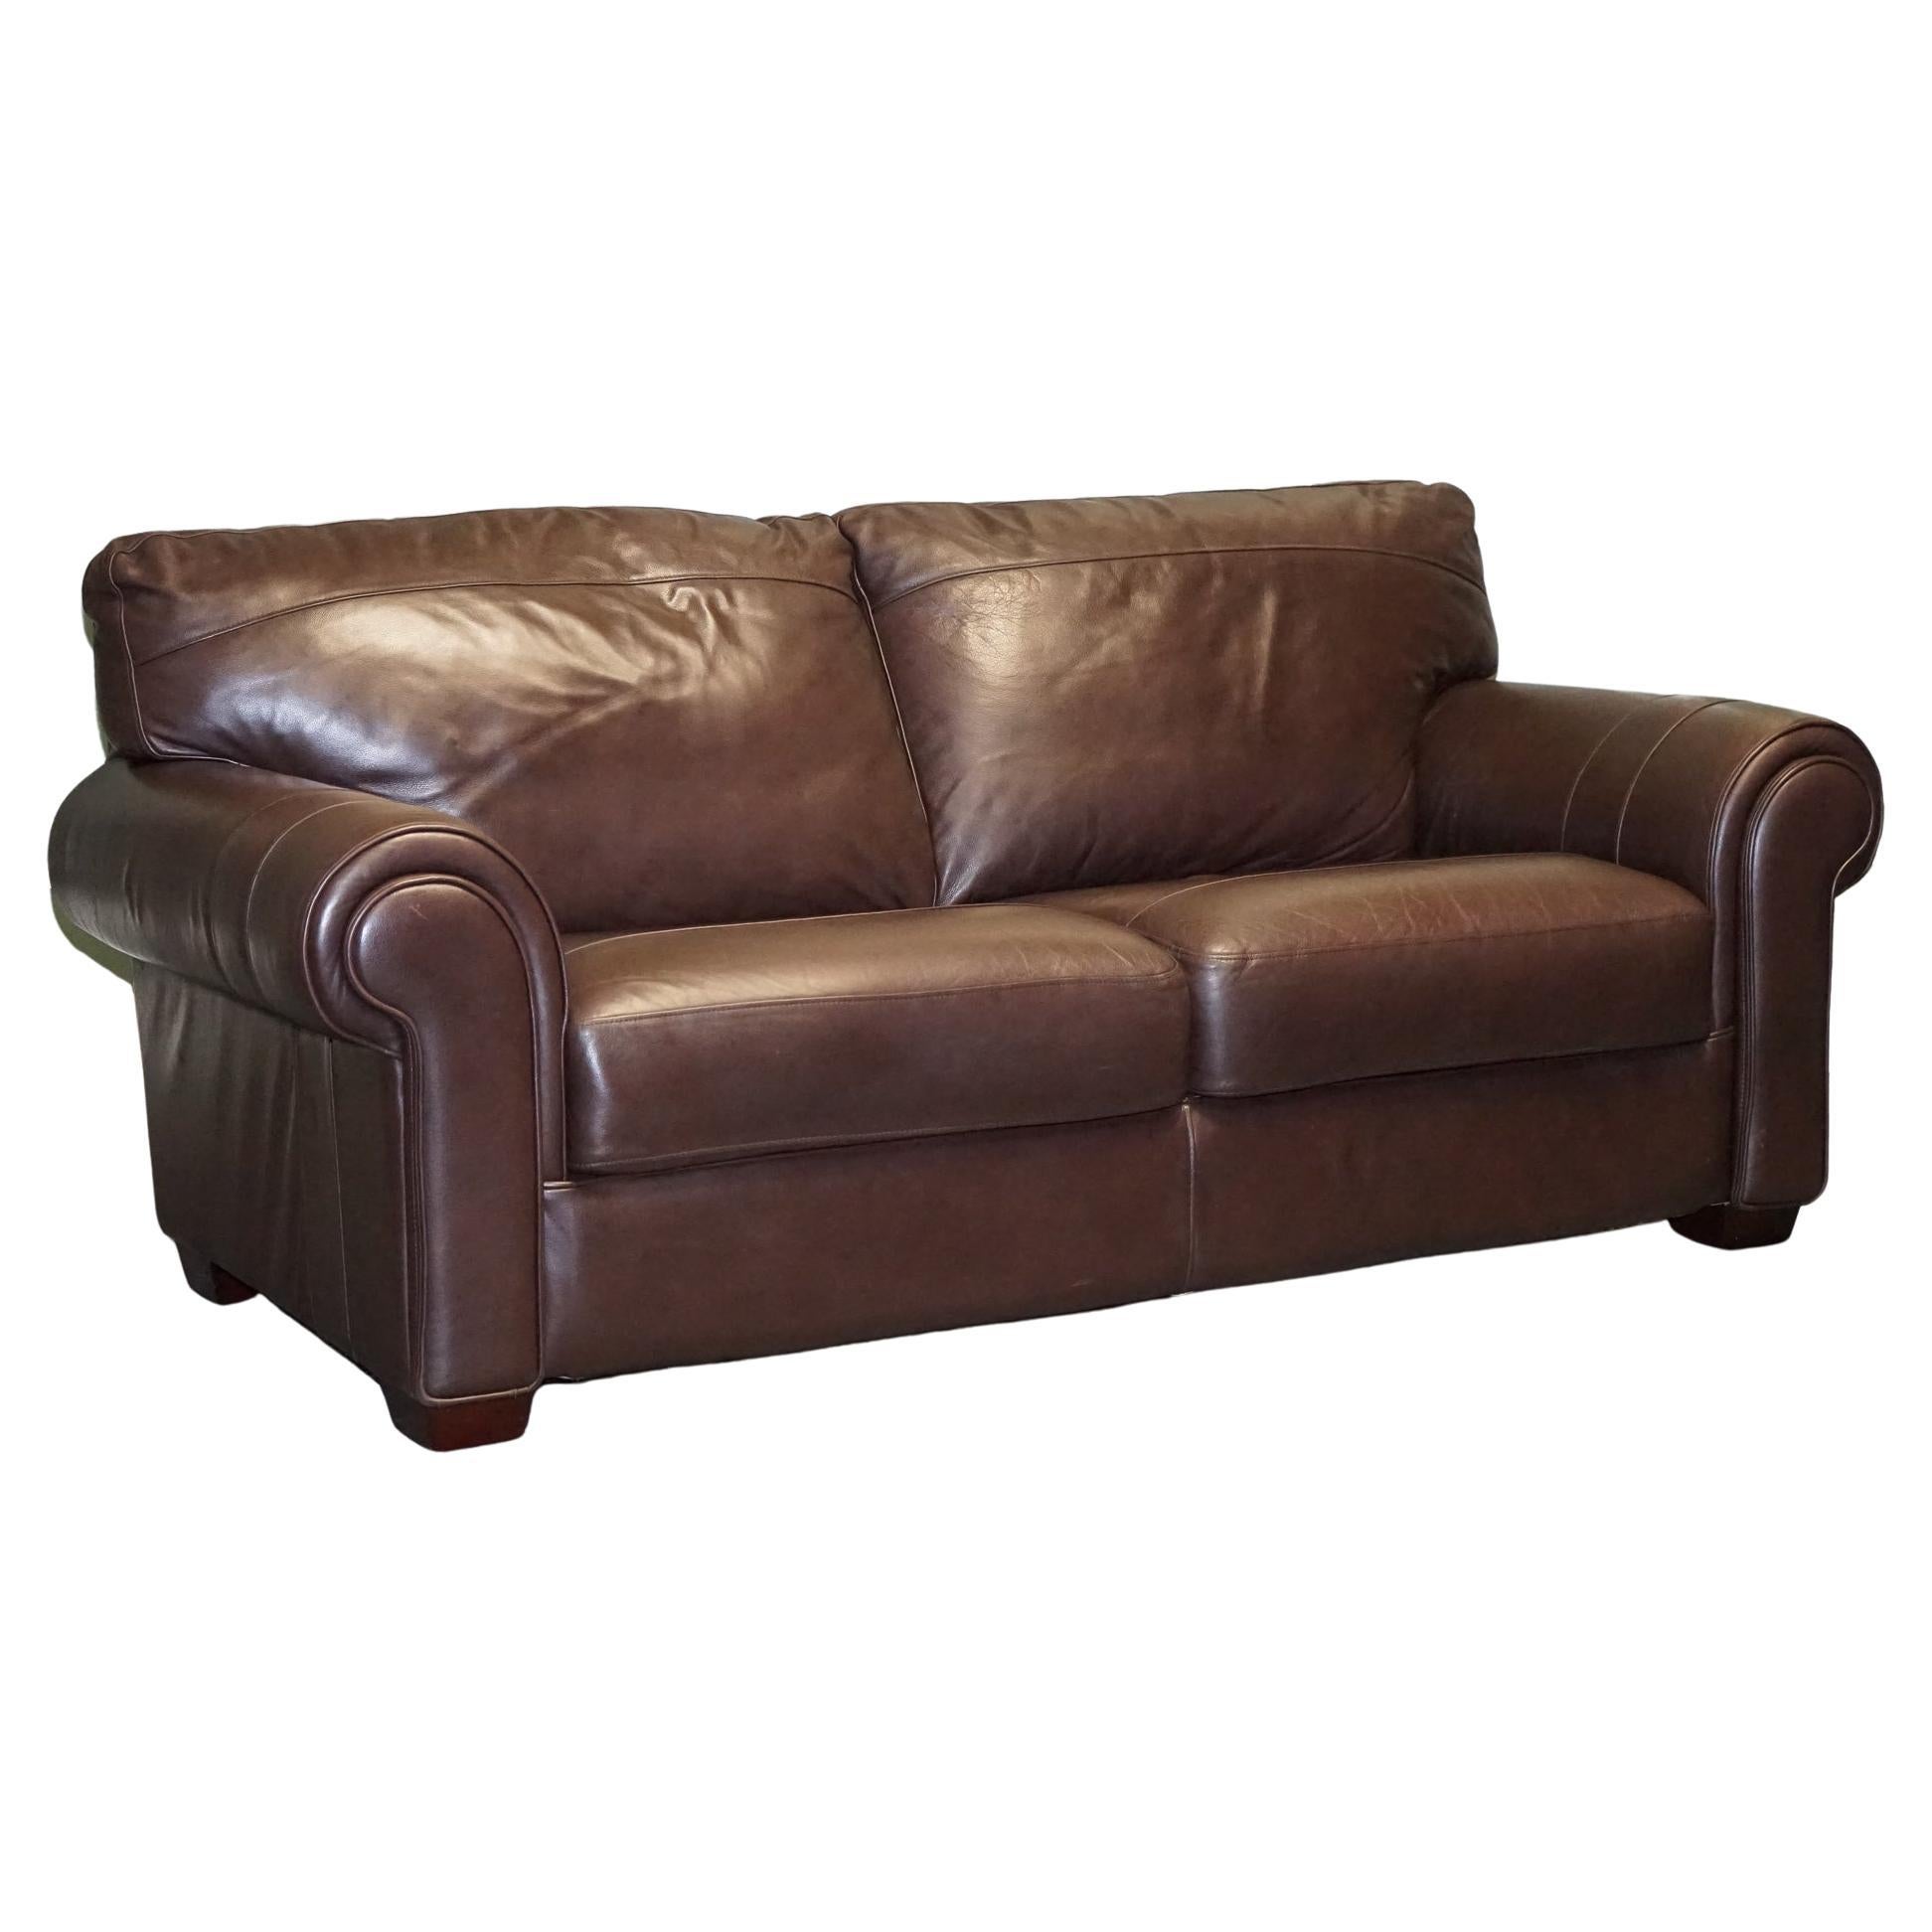 Stunning Comfortable Brown Leather Three to Four Seater Sofa